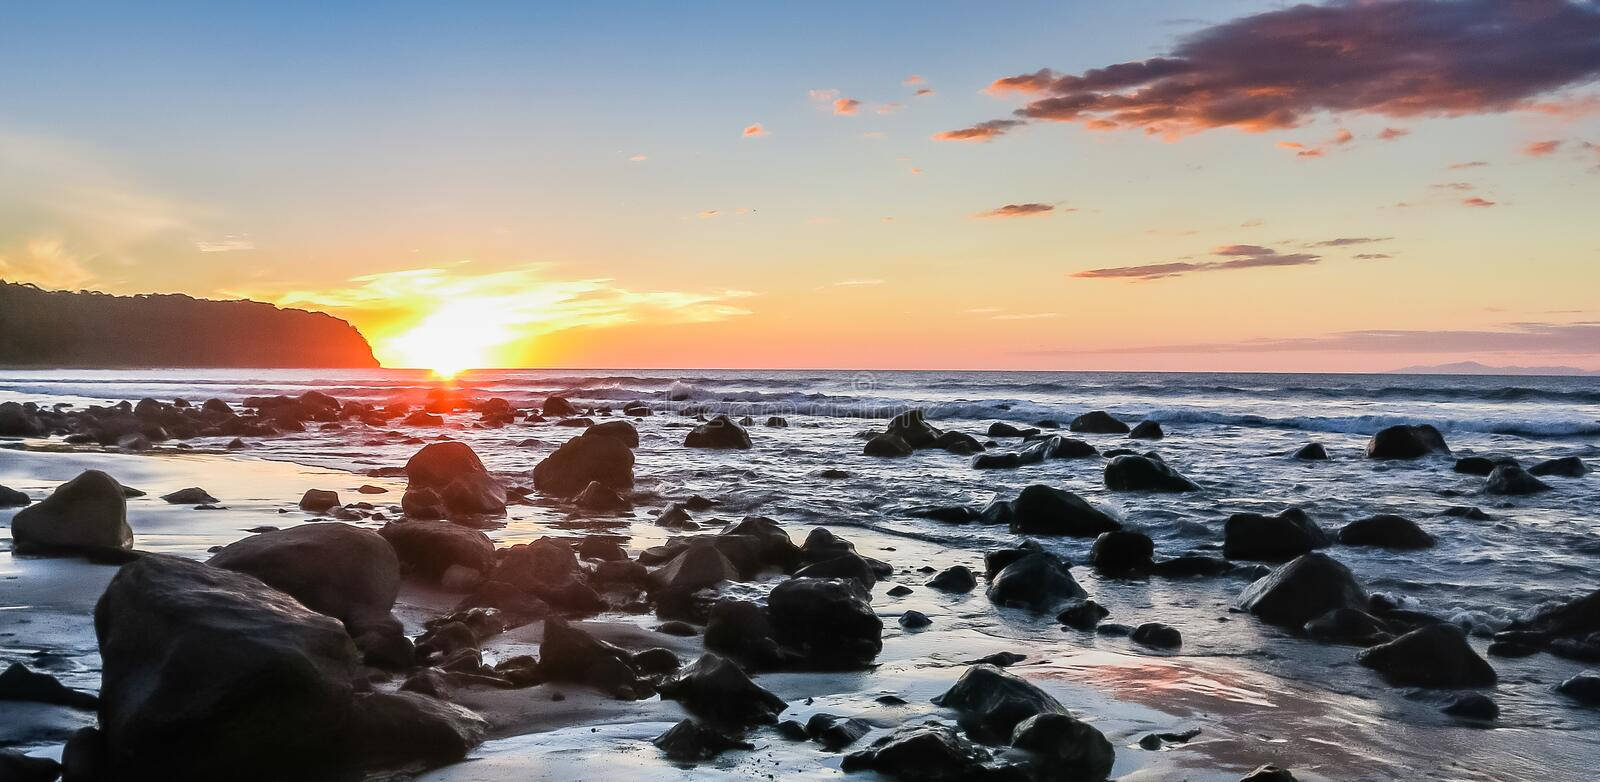 a beach with rocks and a sunset Wallpaper